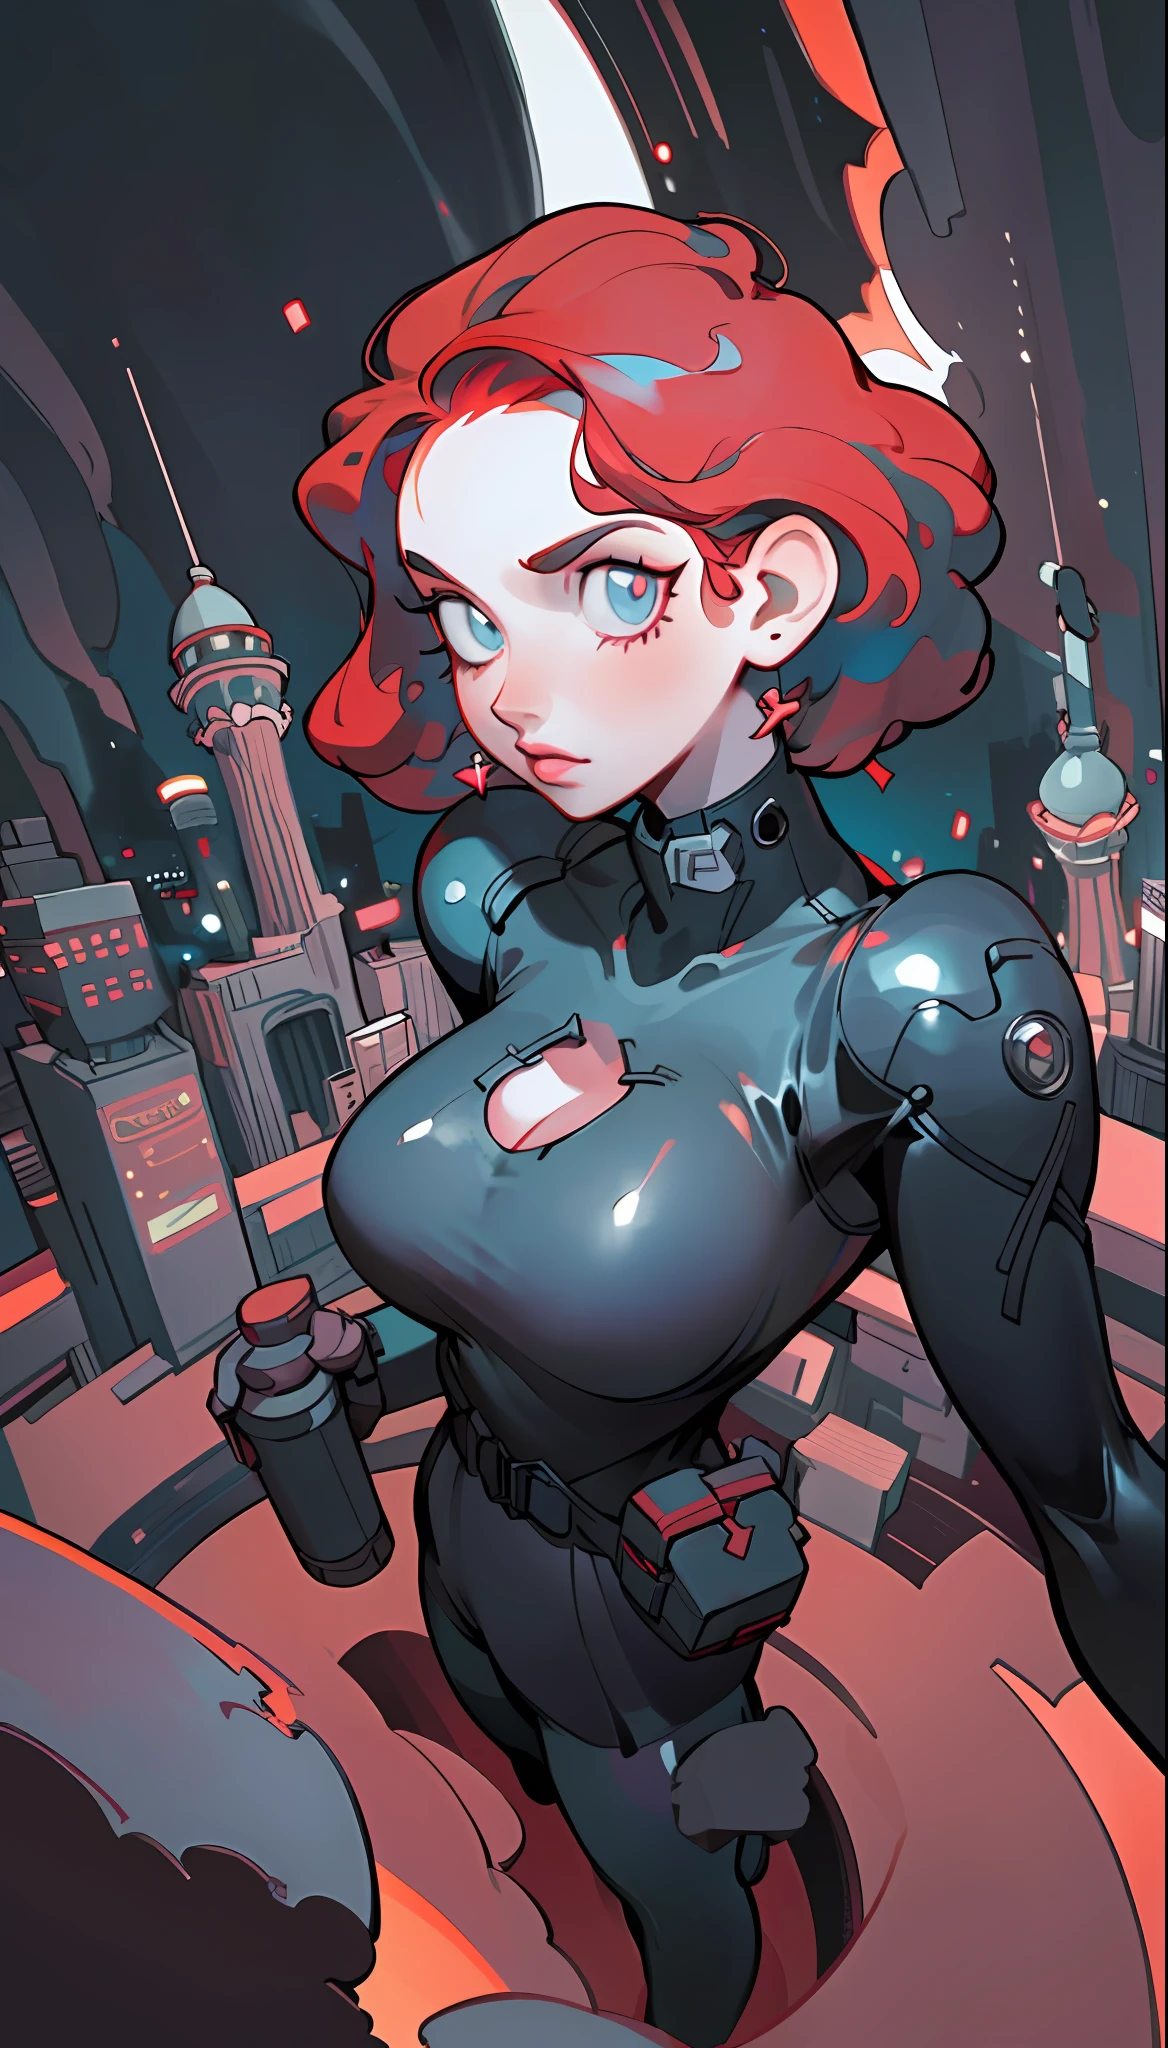 Black widow, short hair, pure black leather tights, pure red hair, looking down from above, full body, perspective composition, exaggerated composition, perfect composition, close up of face, perfect eyes, large perspective, dynamic composition, city in background, neon lights, night